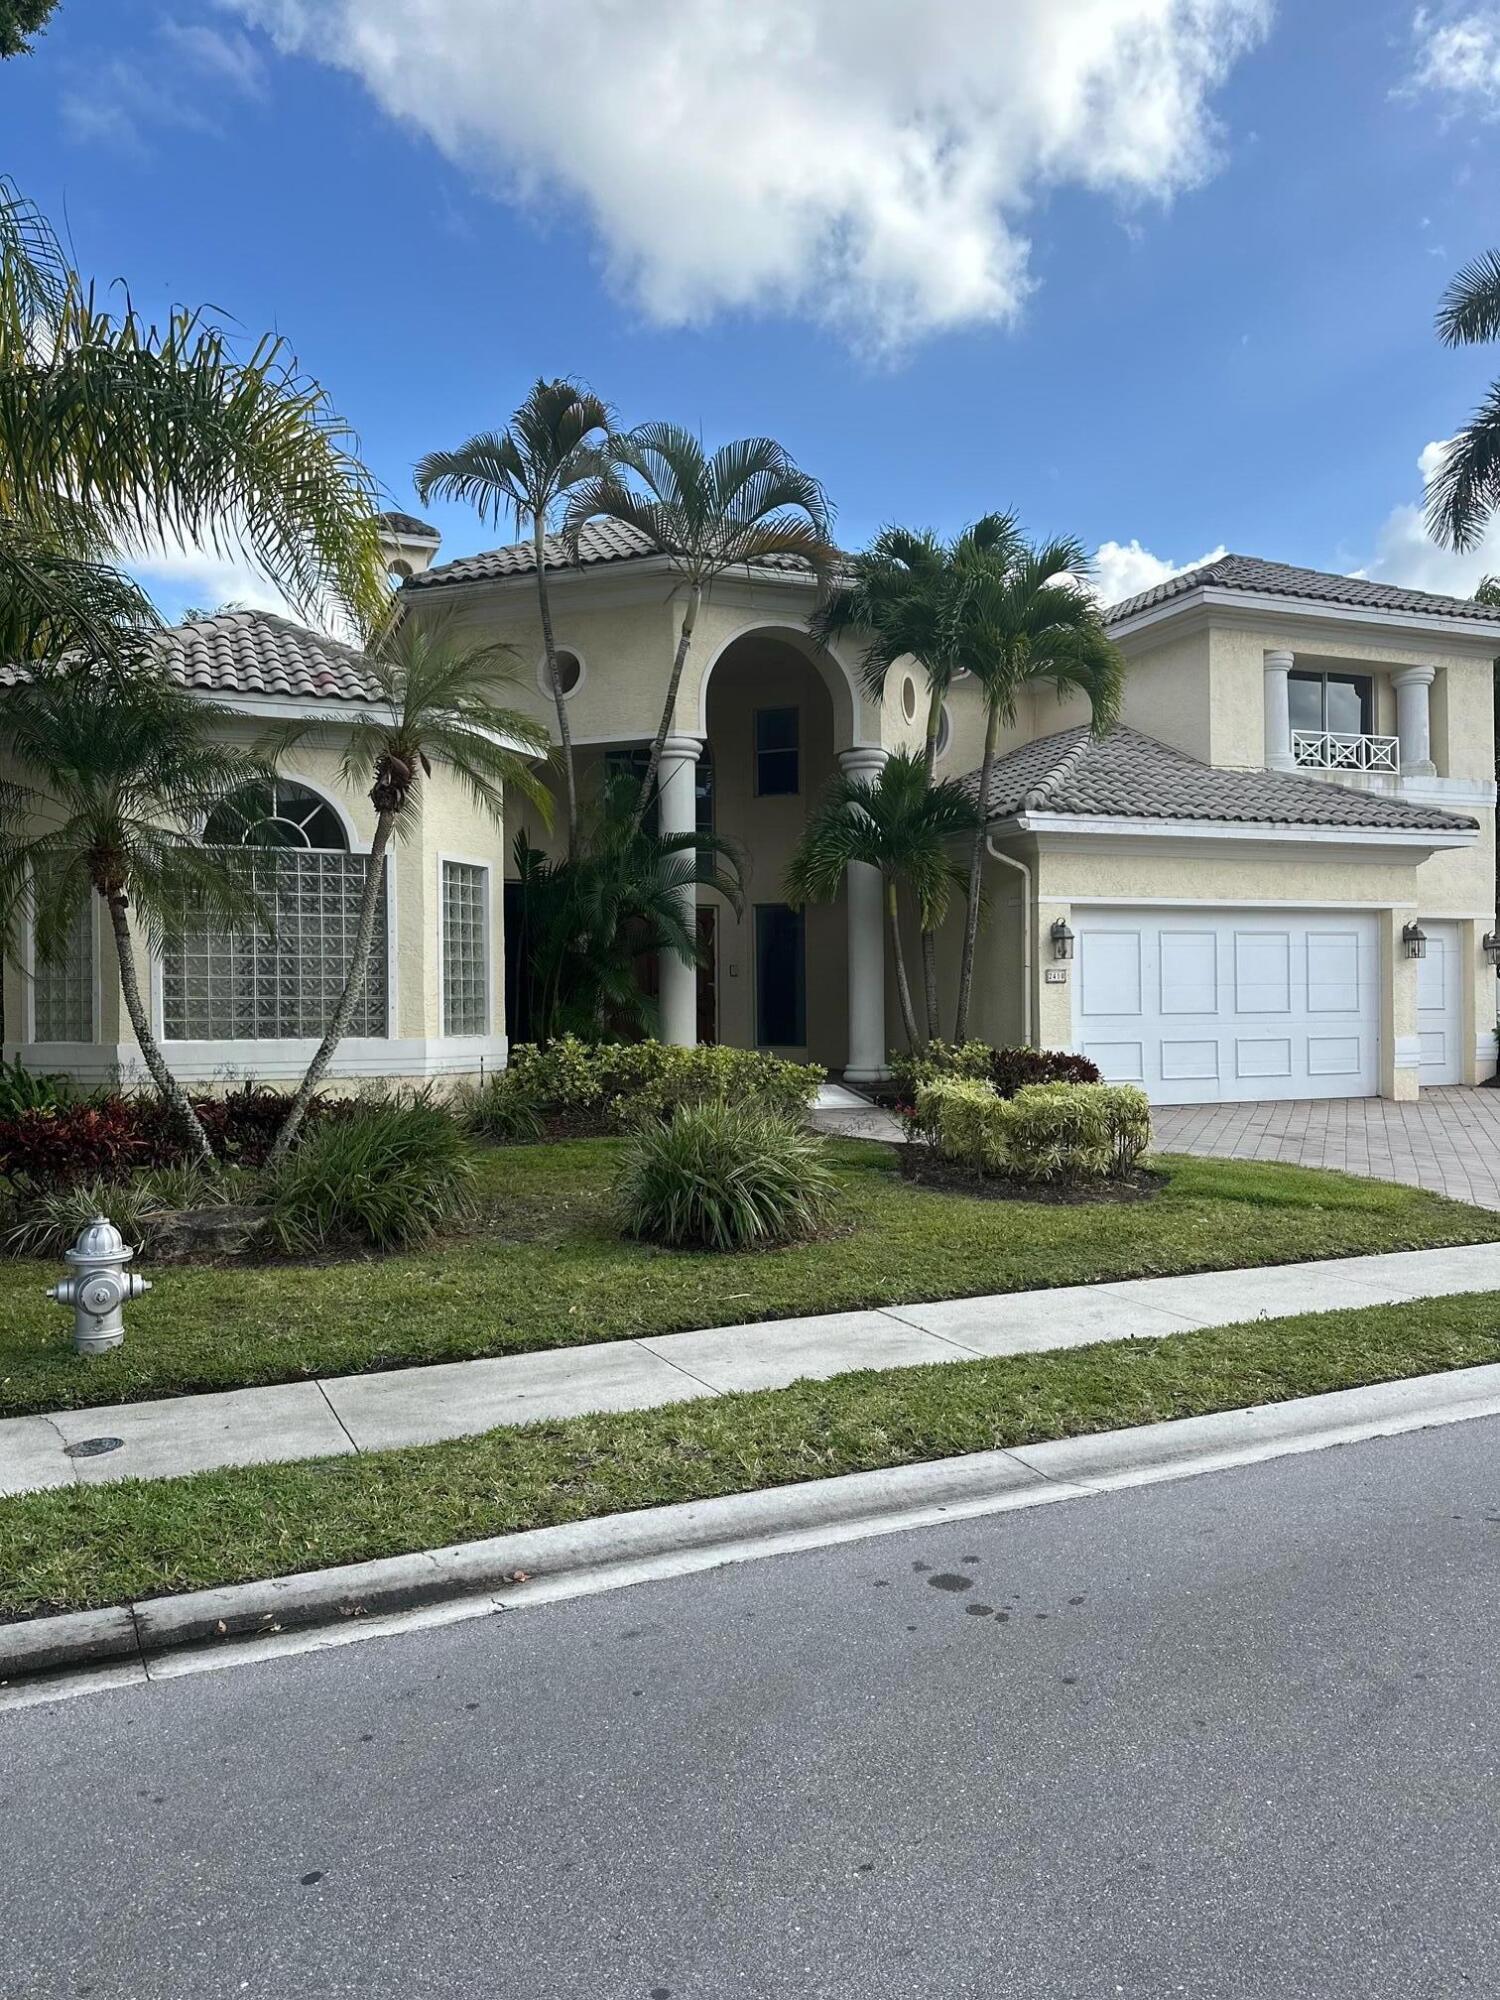 Property for Sale at 2410 Nw 49th Lane, Boca Raton, Palm Beach County, Florida - Bedrooms: 5 
Bathrooms: 4.5  - $2,200,000